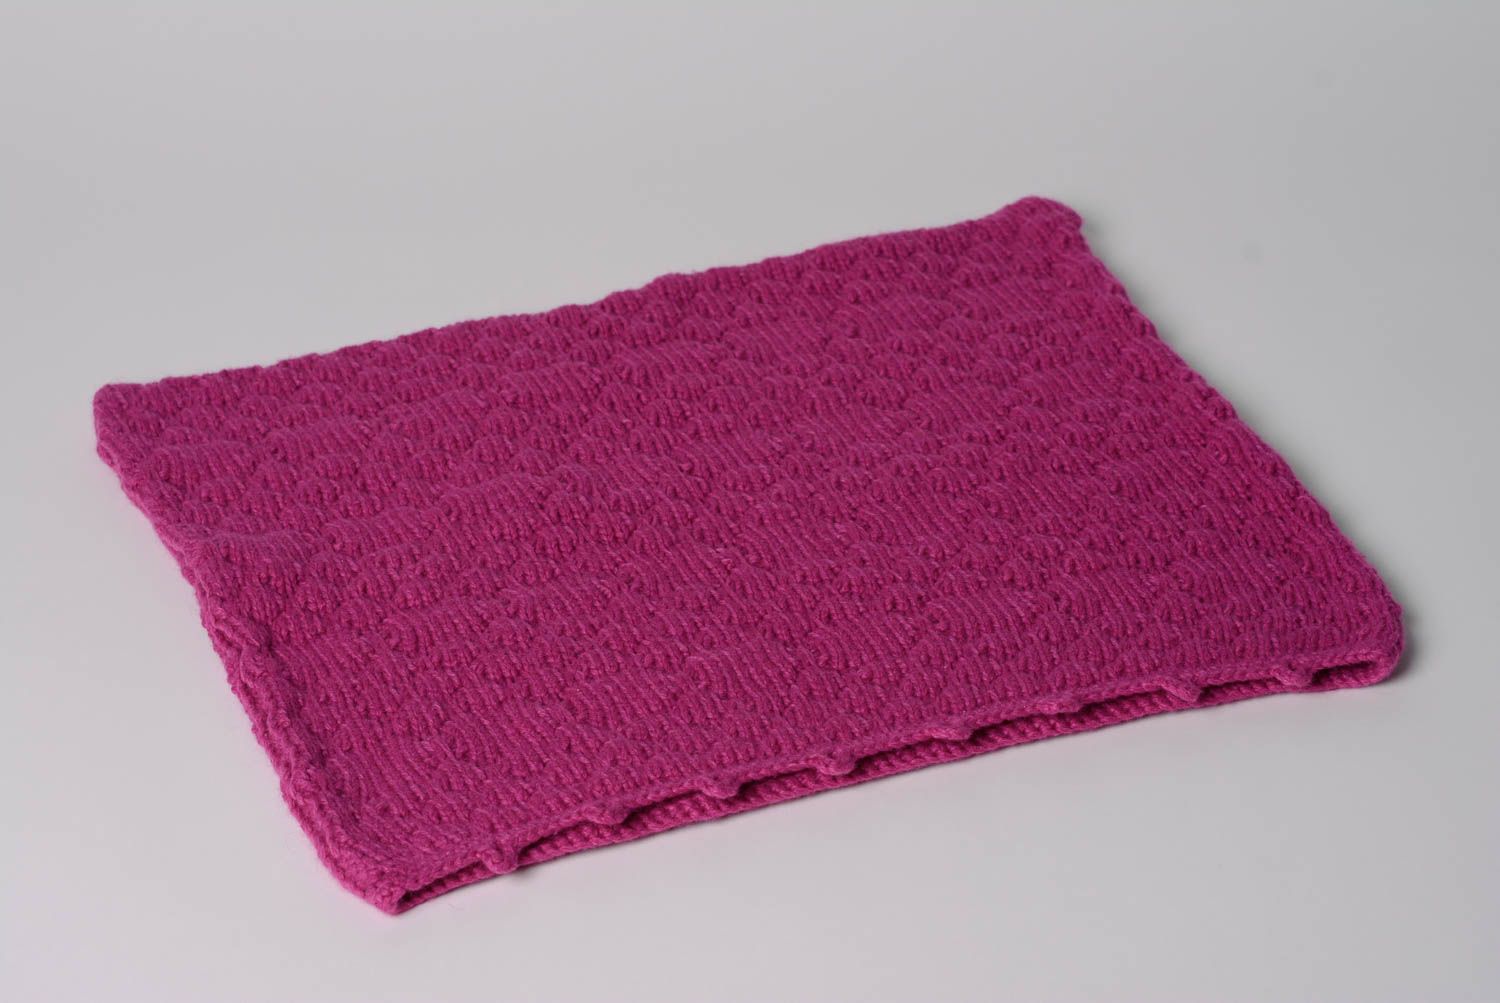 Handmade decorative small wool knitted pillow case of fuchsia color with buttons photo 1